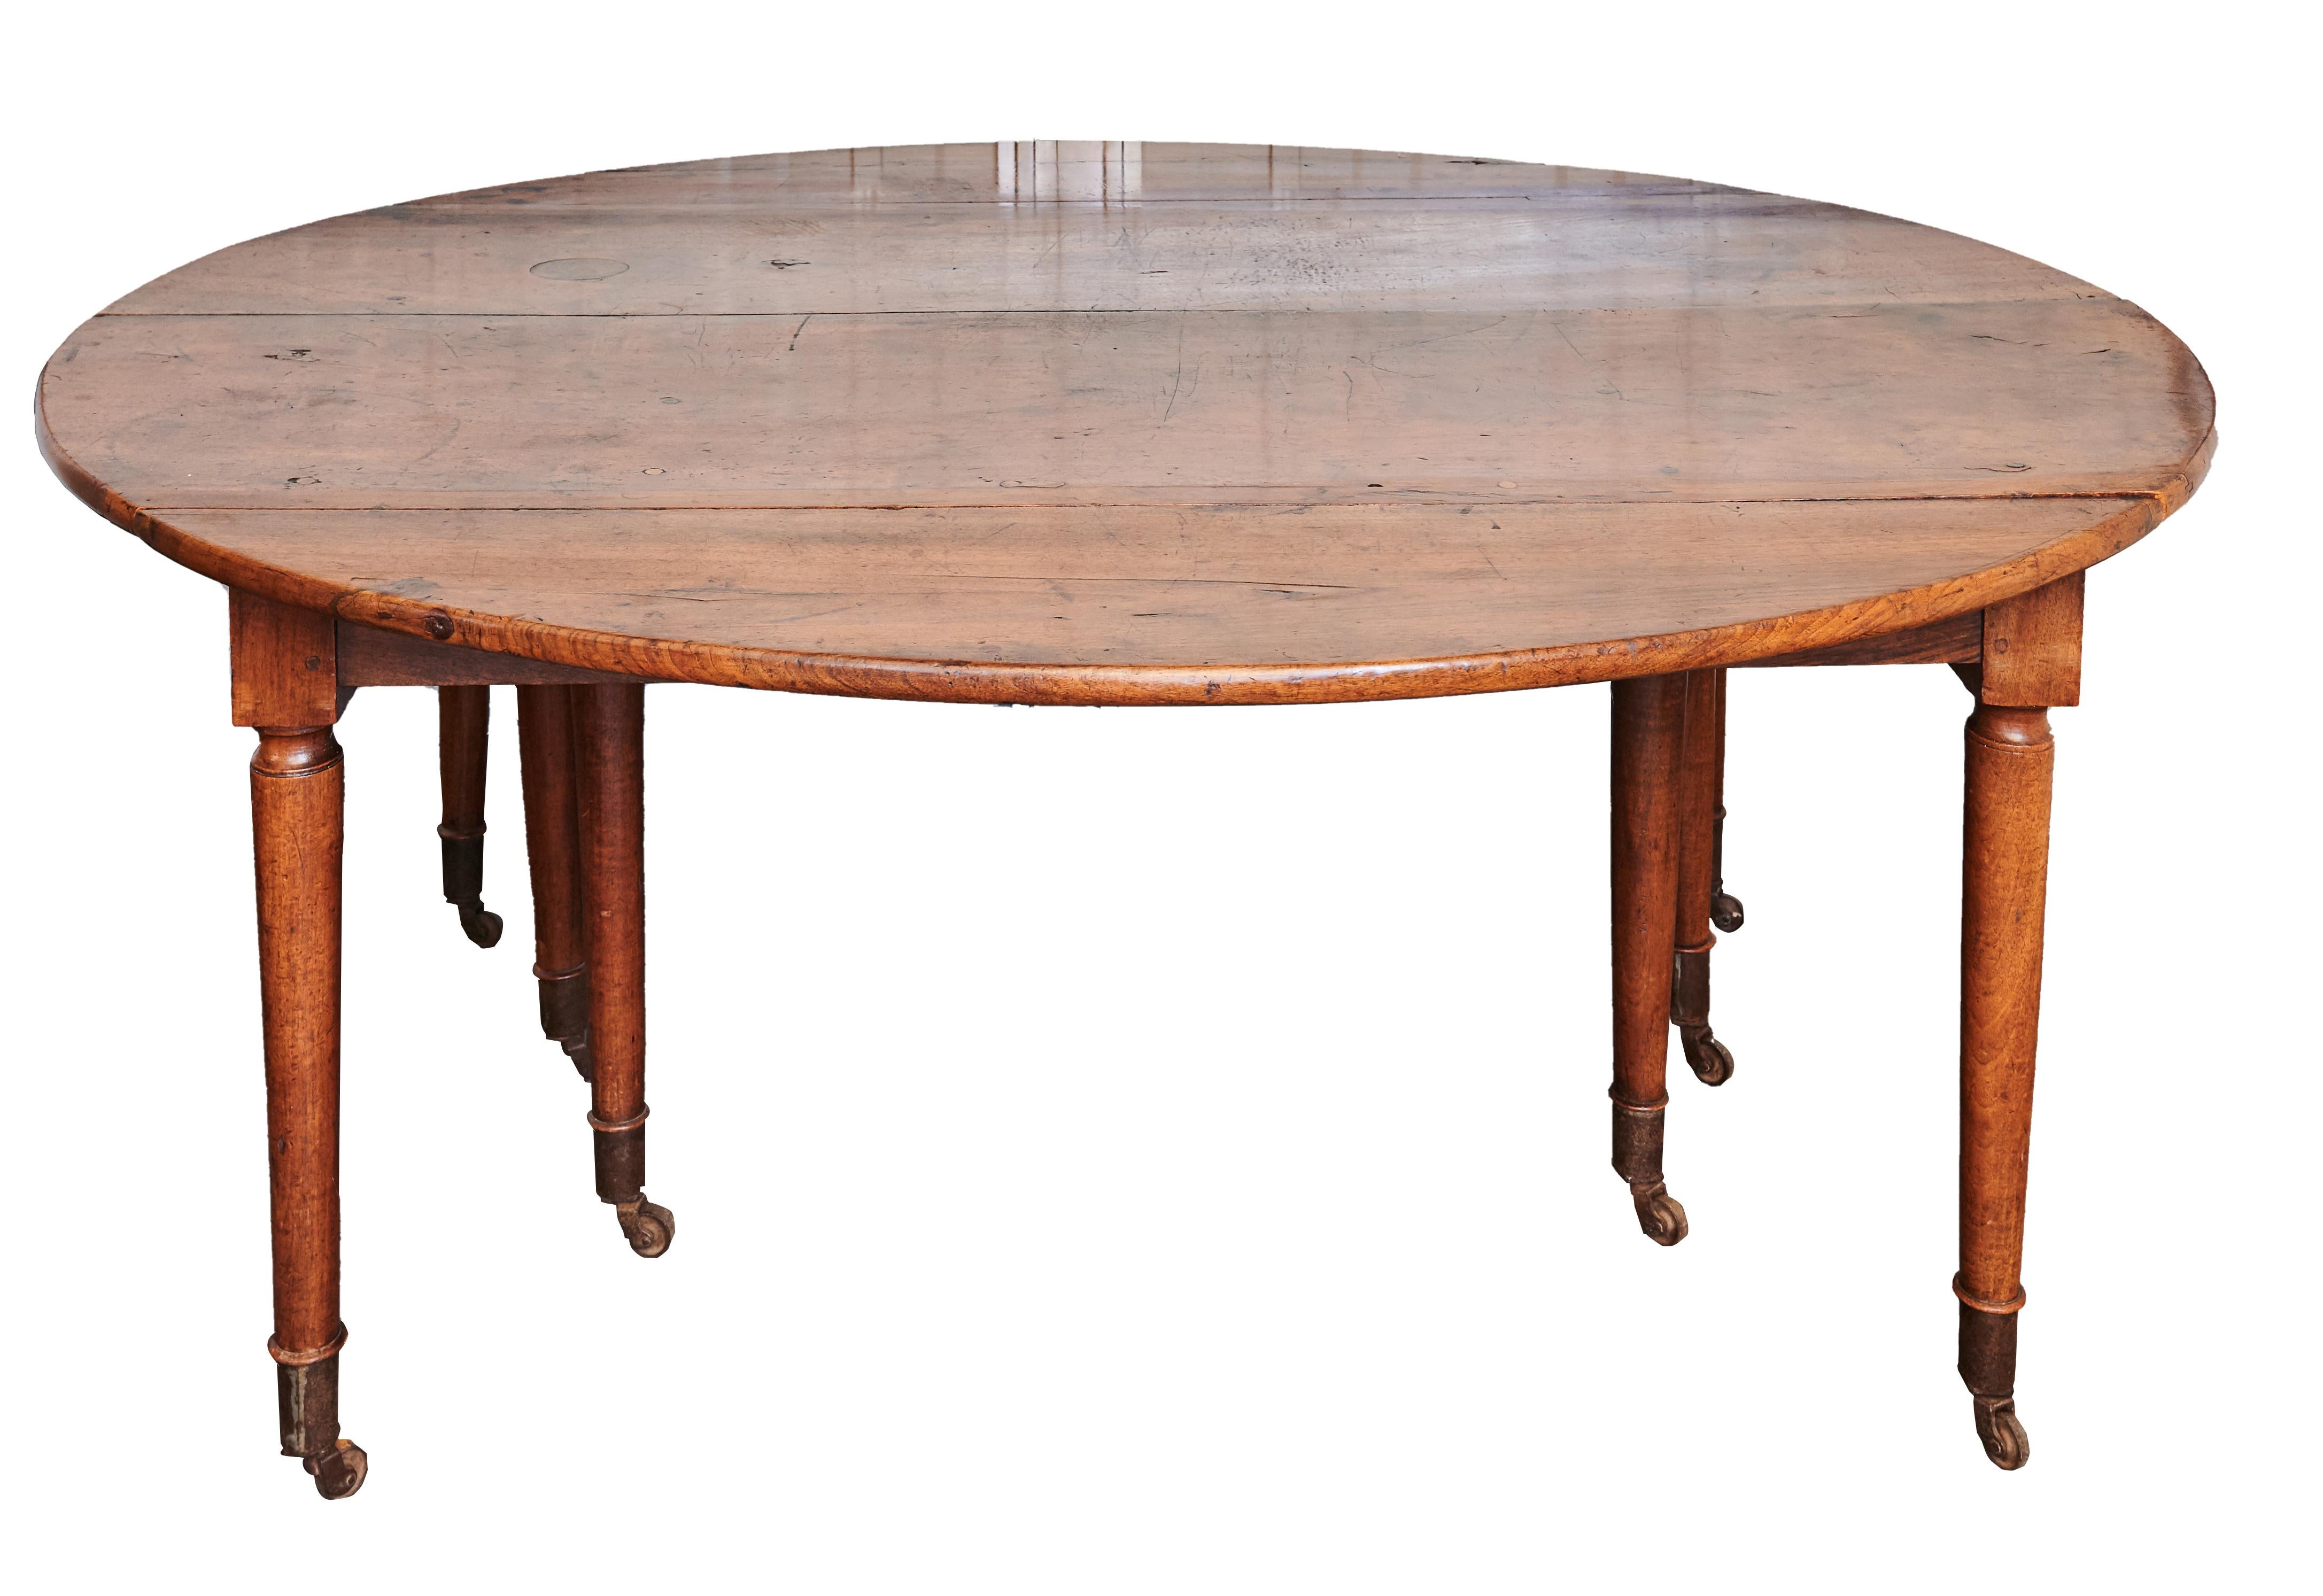 A solid walnut extending dining table, France, first half of the 19th century
With six additional leaves, the extending action incorporating five additional legs, on turned tapering legs, metal cappings and castors, 69 cm high, 166 cm wide, 130 cm